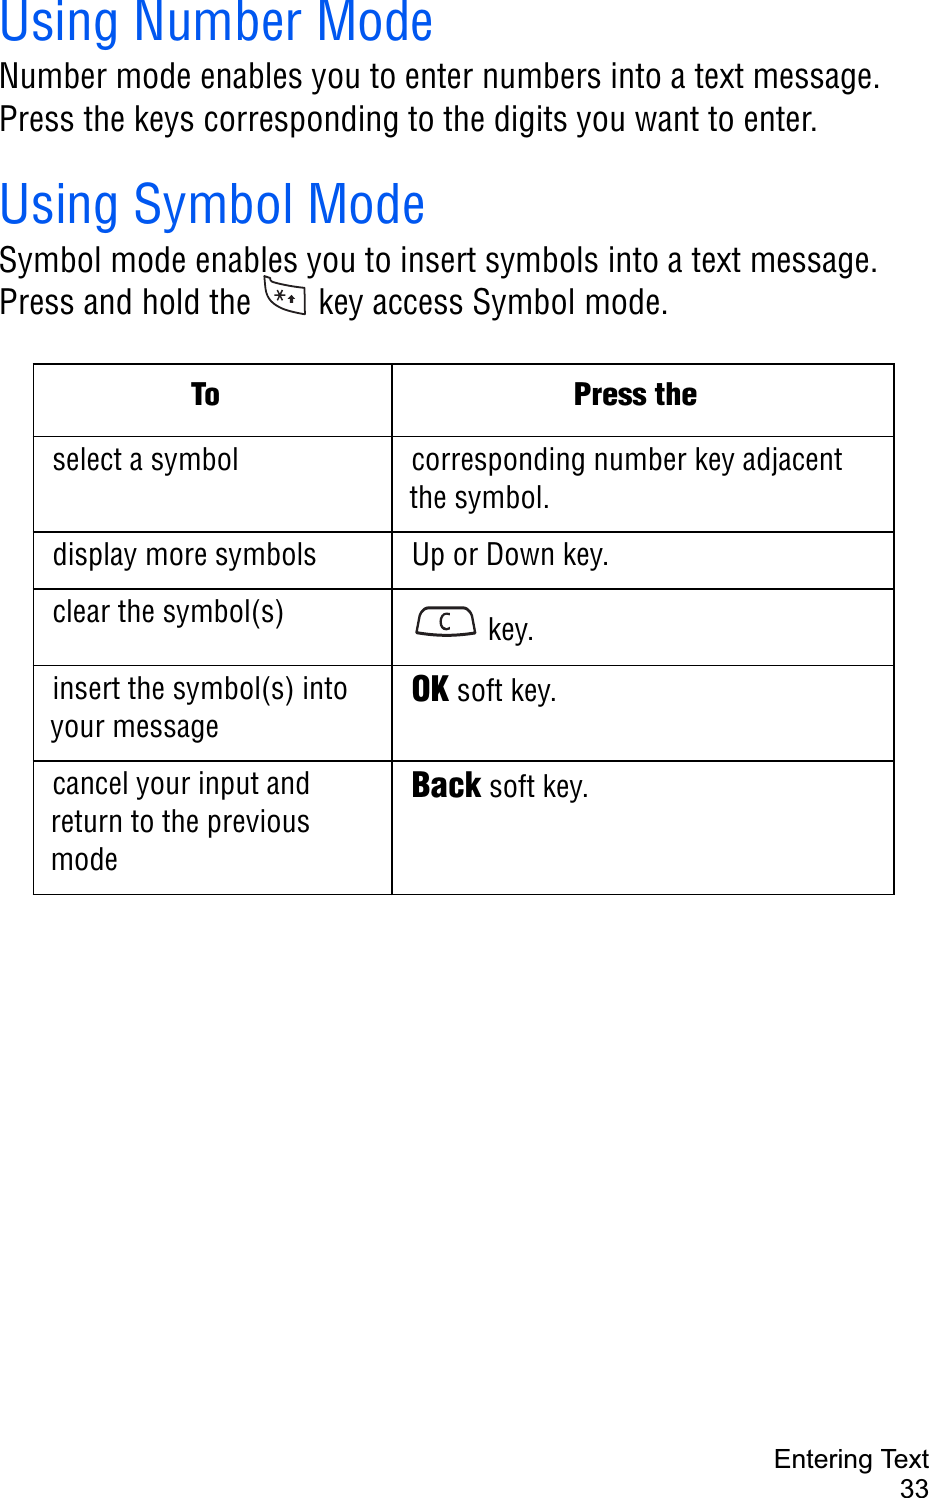 Entering Text33Using Number ModeNumber mode enables you to enter numbers into a text message. Press the keys corresponding to the digits you want to enter. Using Symbol ModeSymbol mode enables you to insert symbols into a text message. Press and hold the   key access Symbol mode. To Press the select a symbol corresponding number key adjacent the symbol.display more symbols Up or Down key.clear the symbol(s)  key.insert the symbol(s) into your messageOK soft key.cancel your input and return to the previous modeBack soft key.